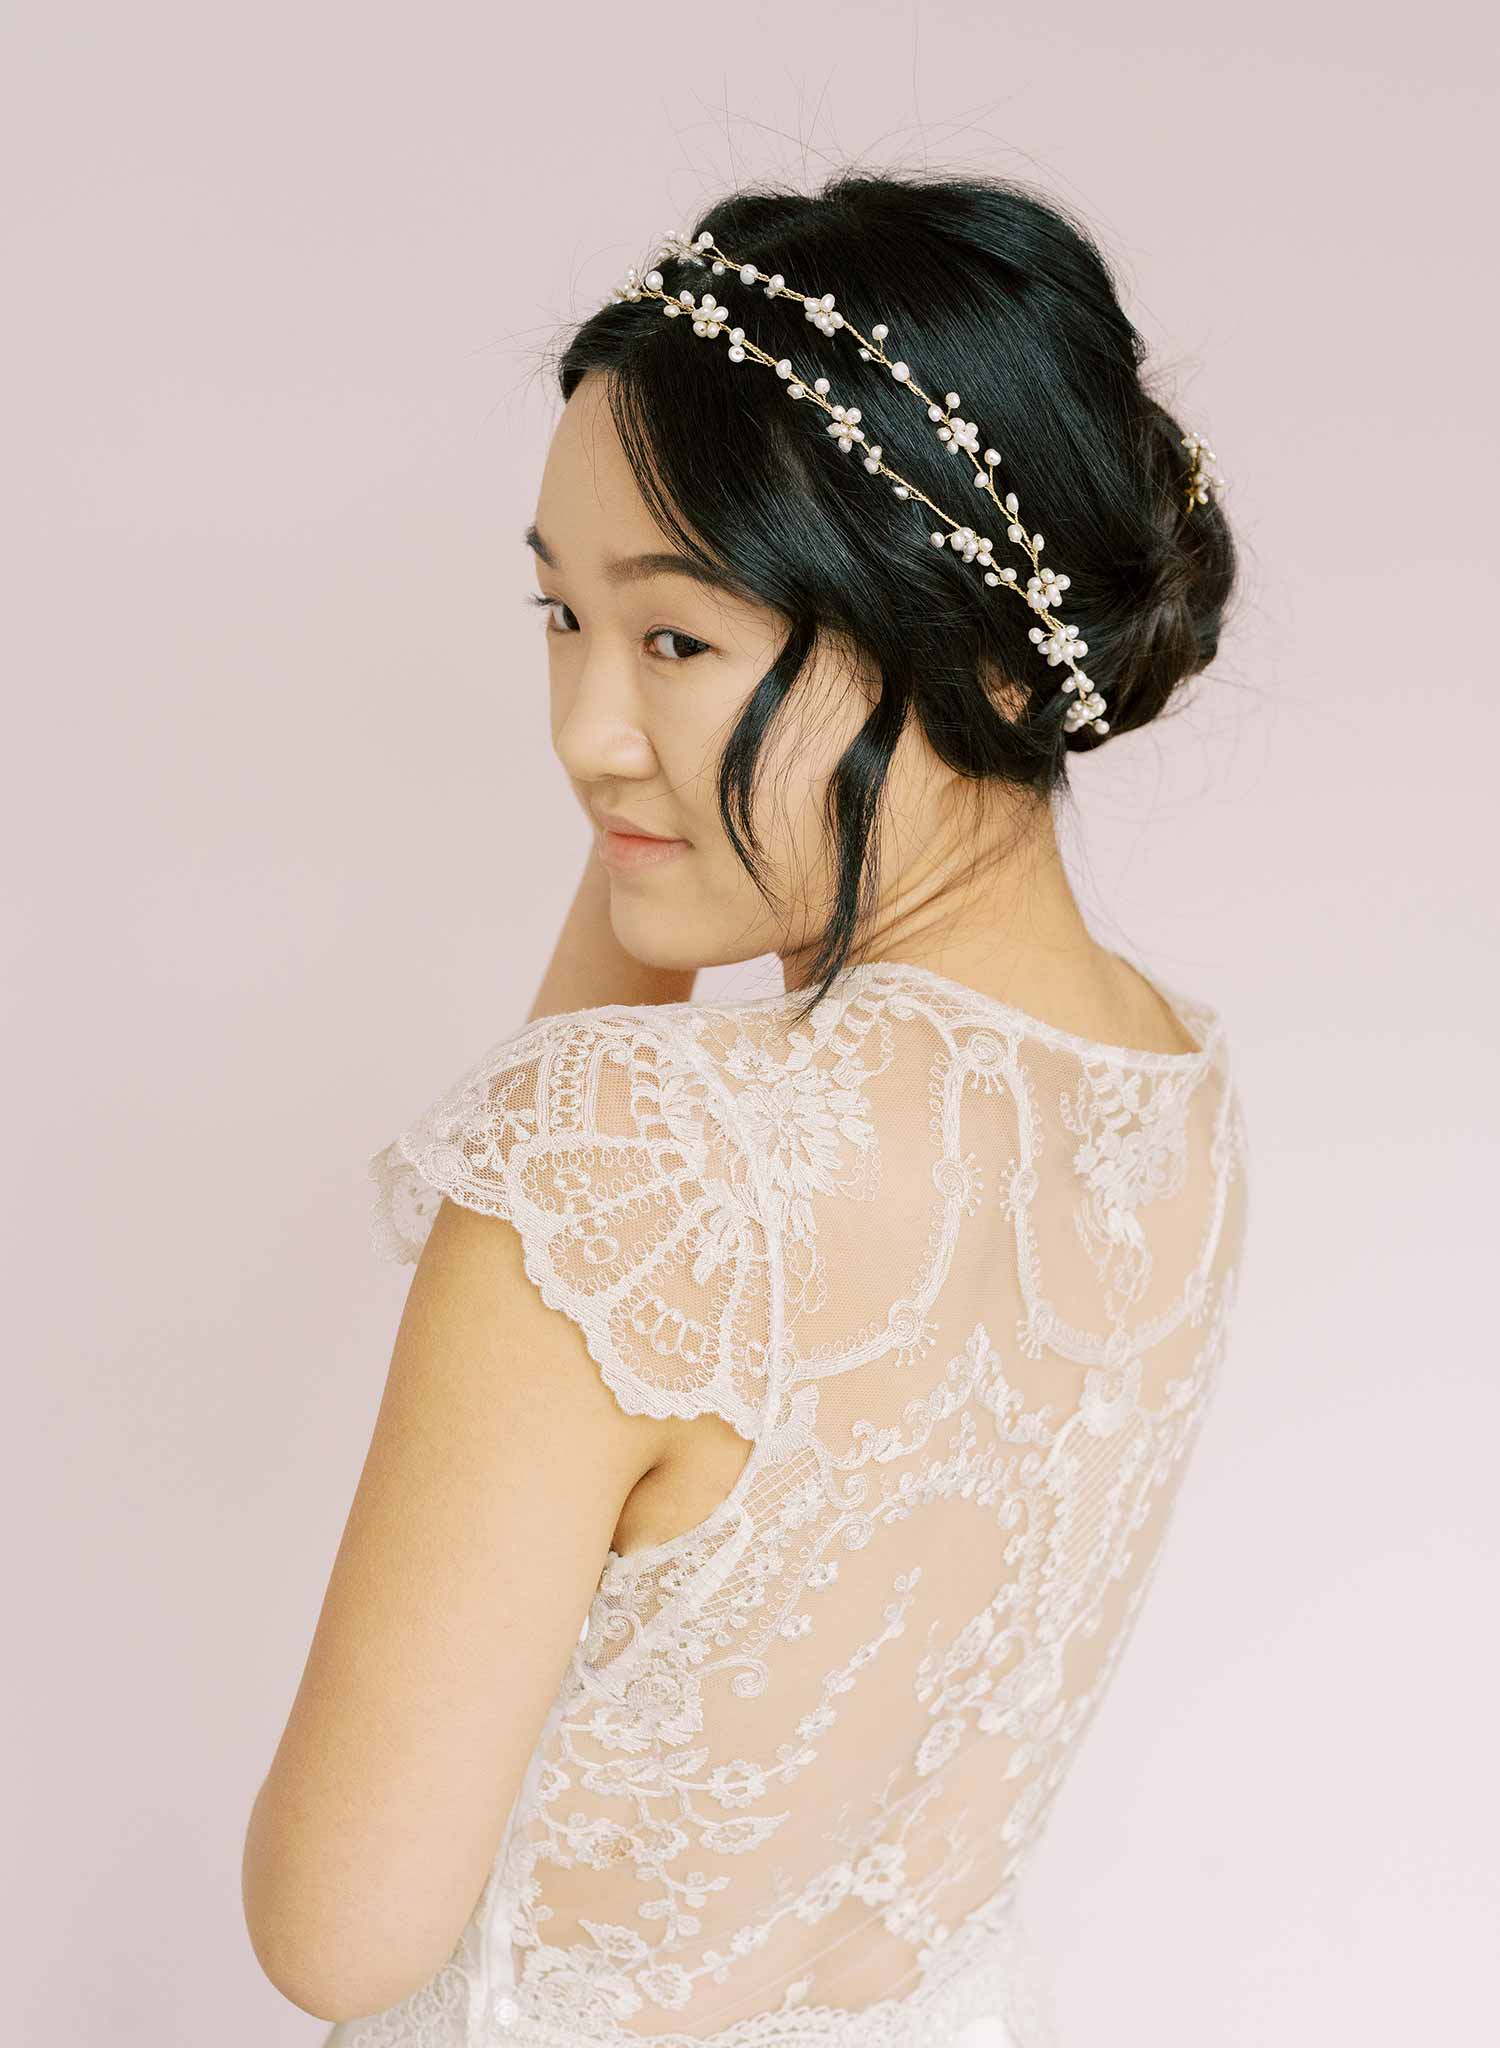 Freshwater pearl daisy chain hair vine, extra long - Style #2137